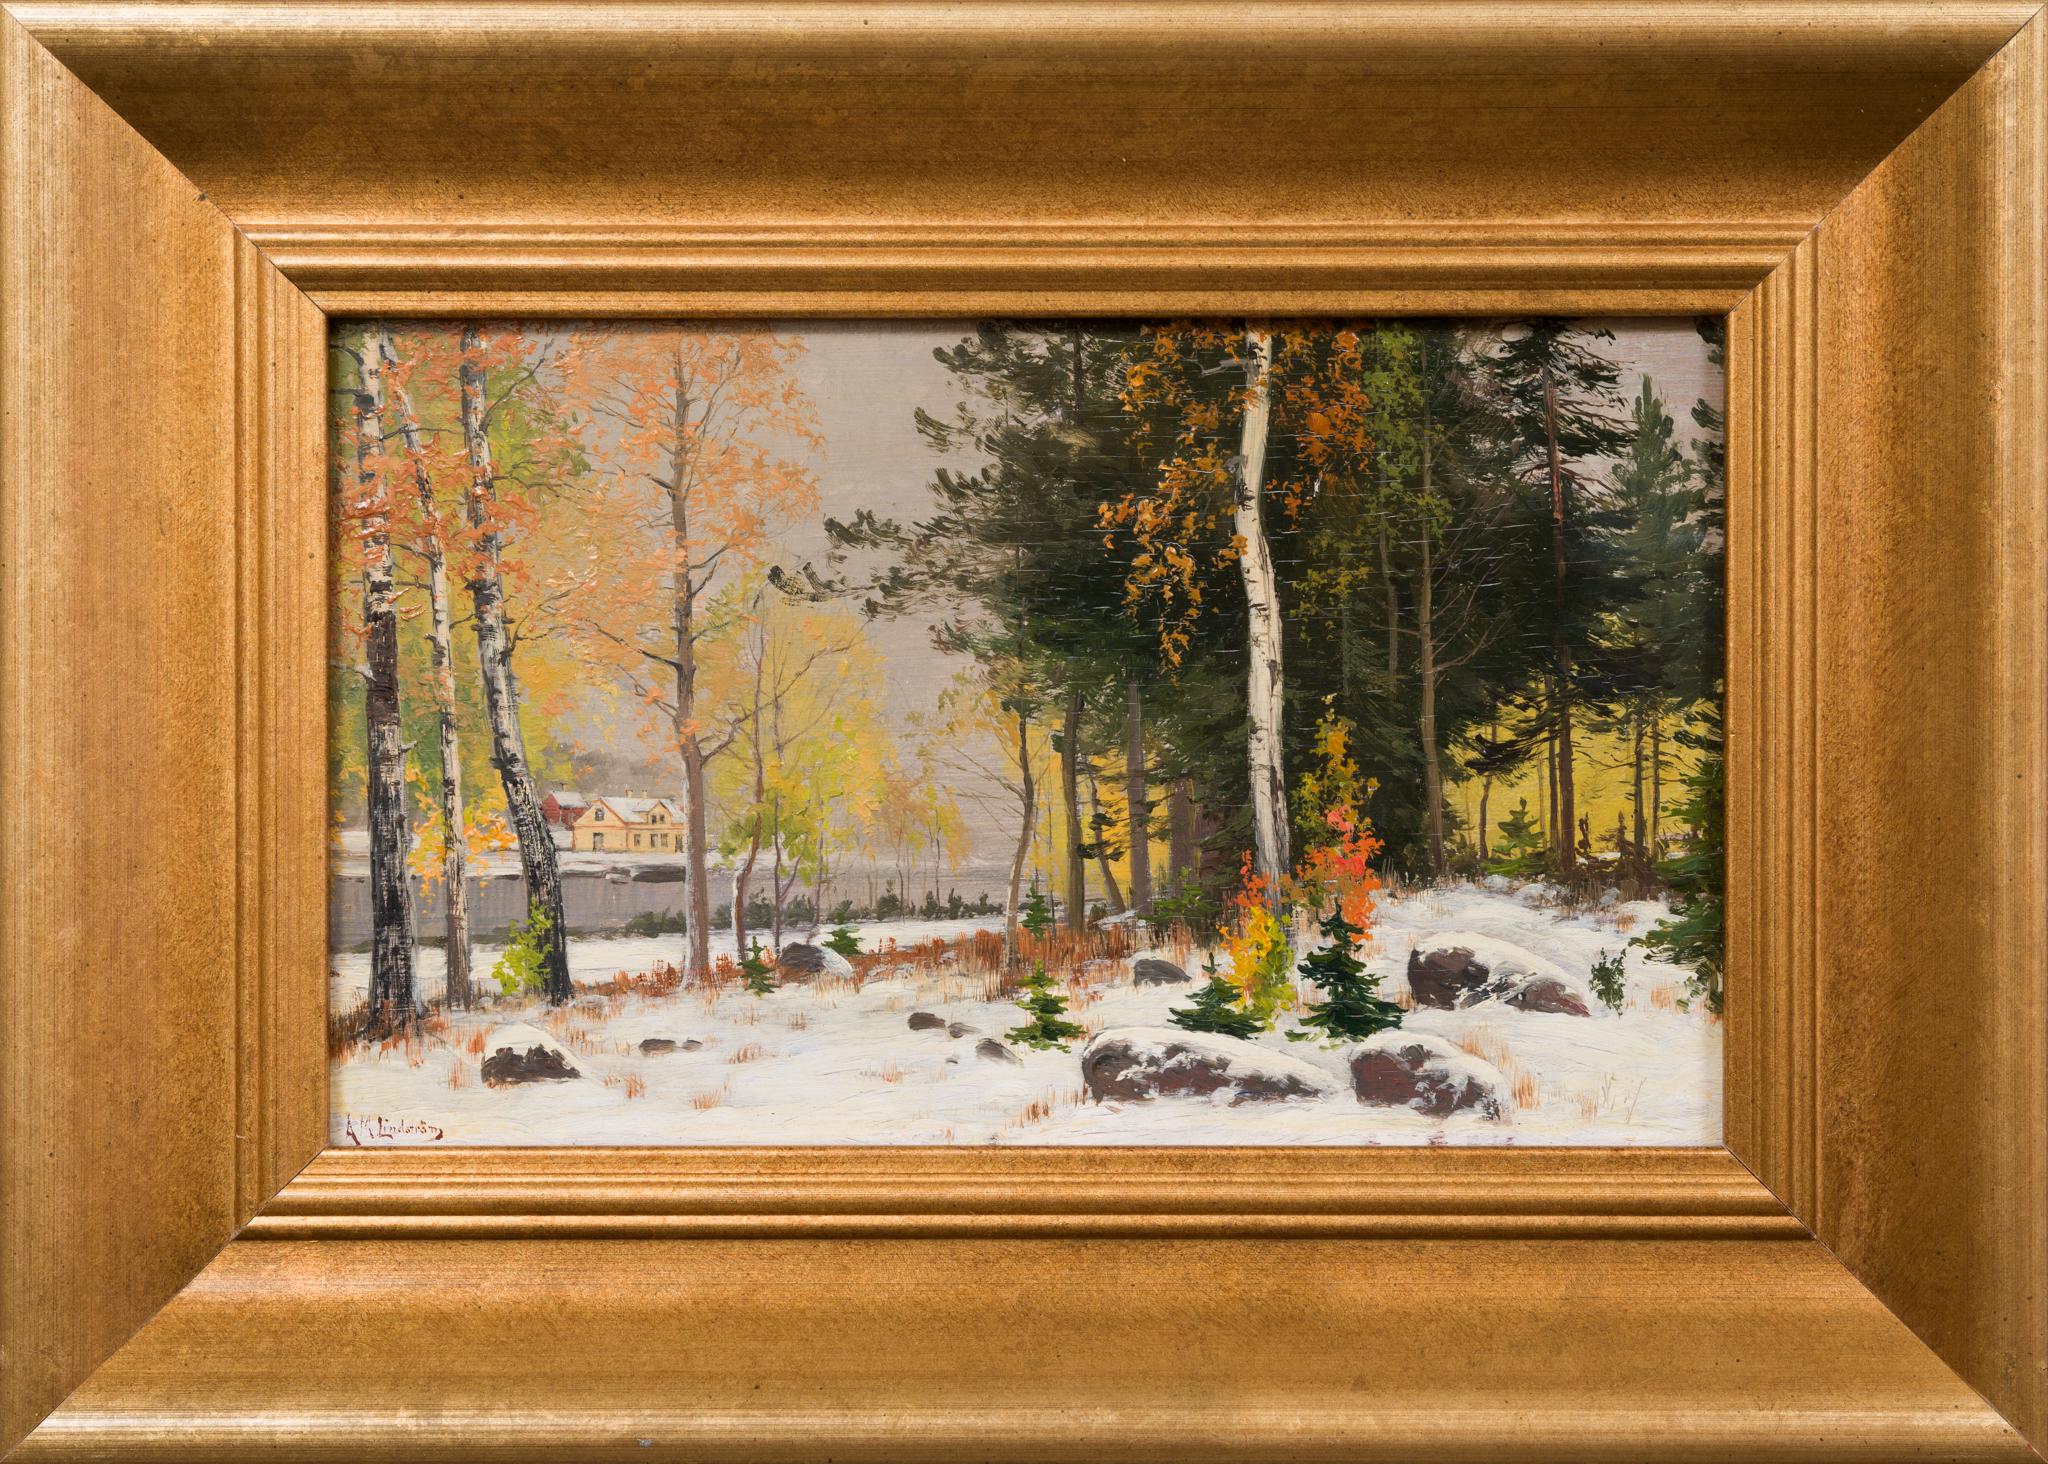 Small Painting Called First Snow by Swedish Artist Arvid Mauritz Lindström